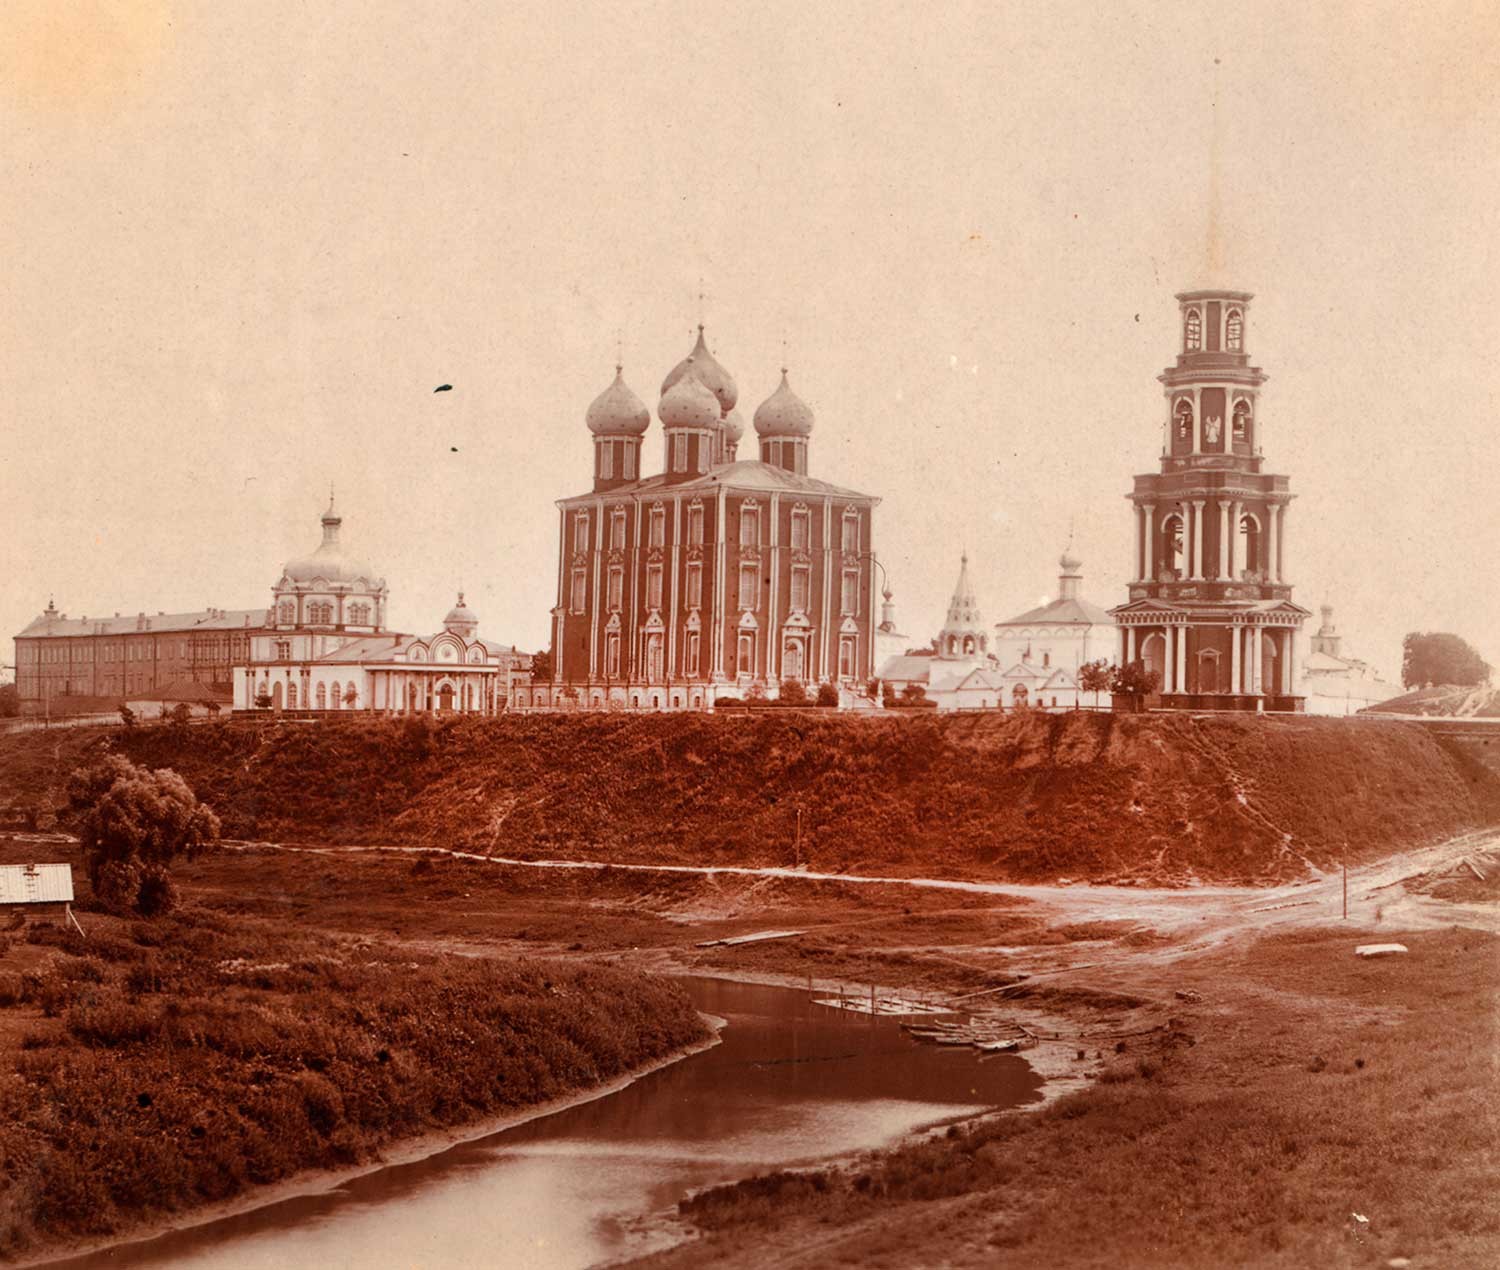 Ryazan Kremlin, northwest view. From left: Archbishop's Palace, Cathedral of Nativity of Christ, Dormition Cathedral, Epiphany Church, Transfiguration Cathedral, bell tower. Summer 1912.